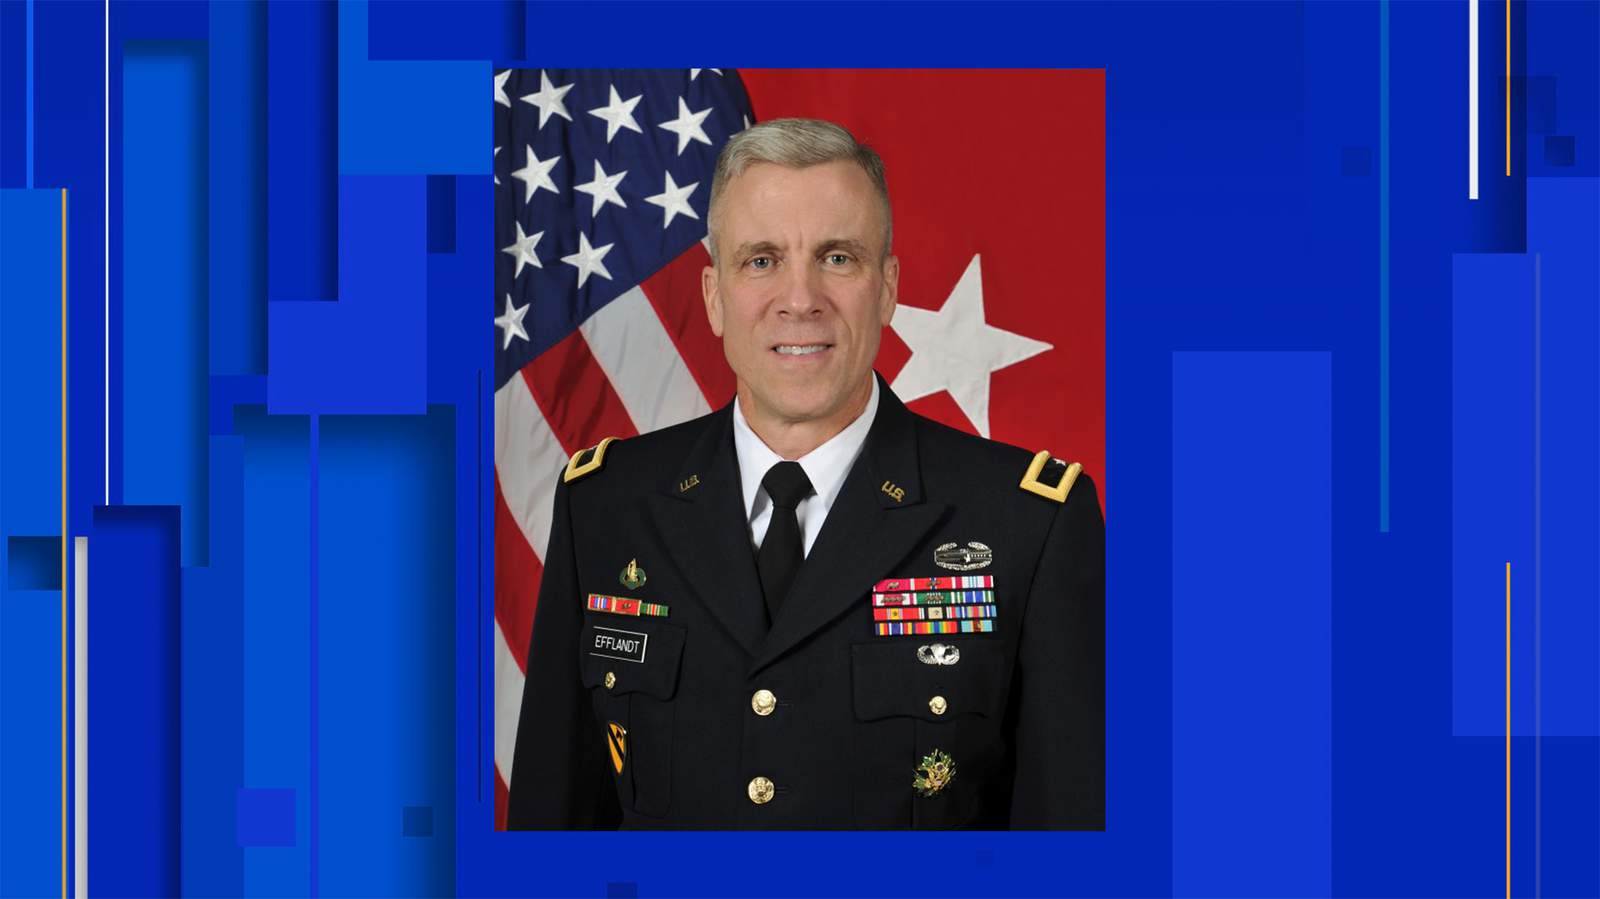 Major general in charge of Fort Hood during Vanessa Guillen’s disappearance reassigned to Joint Base San Antonio